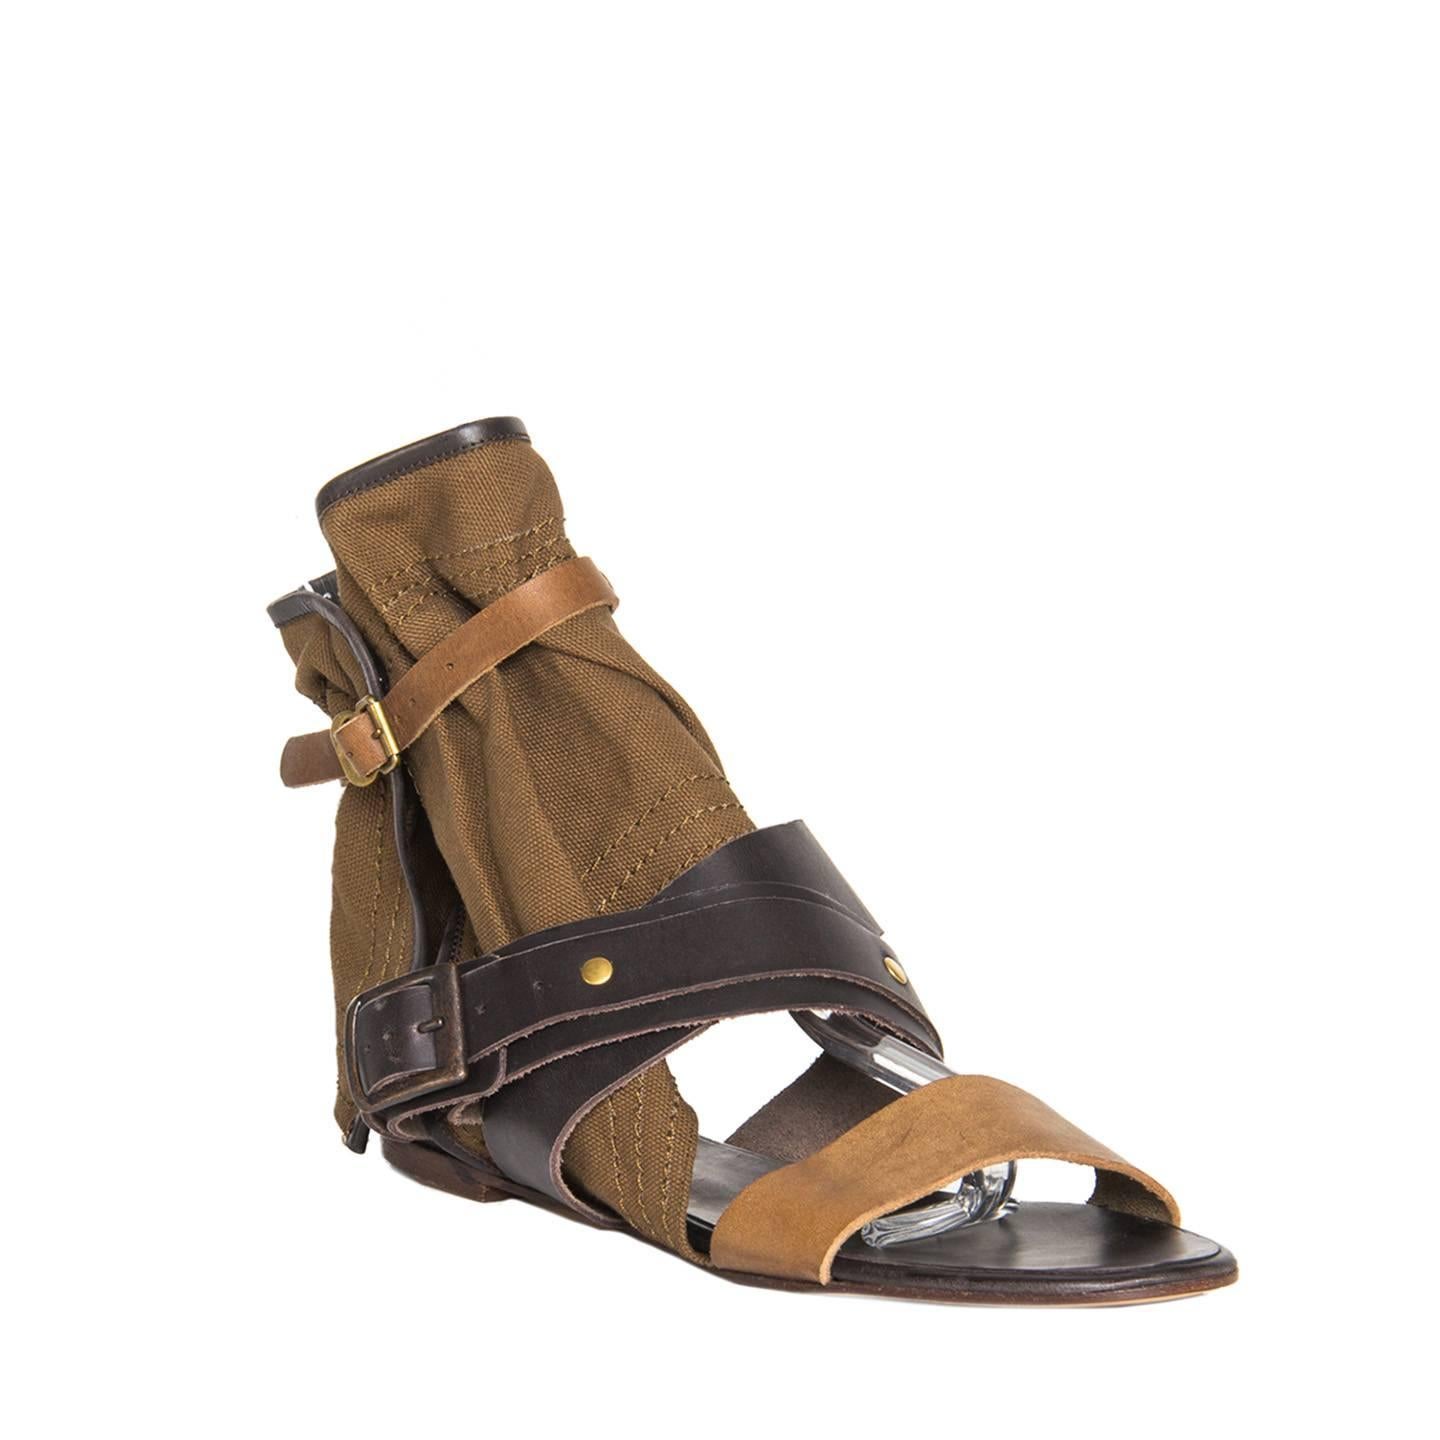 Dark brown and cognac color leather gladiator sandals with open front and a wide olive canvas cuff. The canvas is enriched by brown leather binding on profiles, tone-on-tone top stitches and it fastens with a snap buttons, while the leather straps